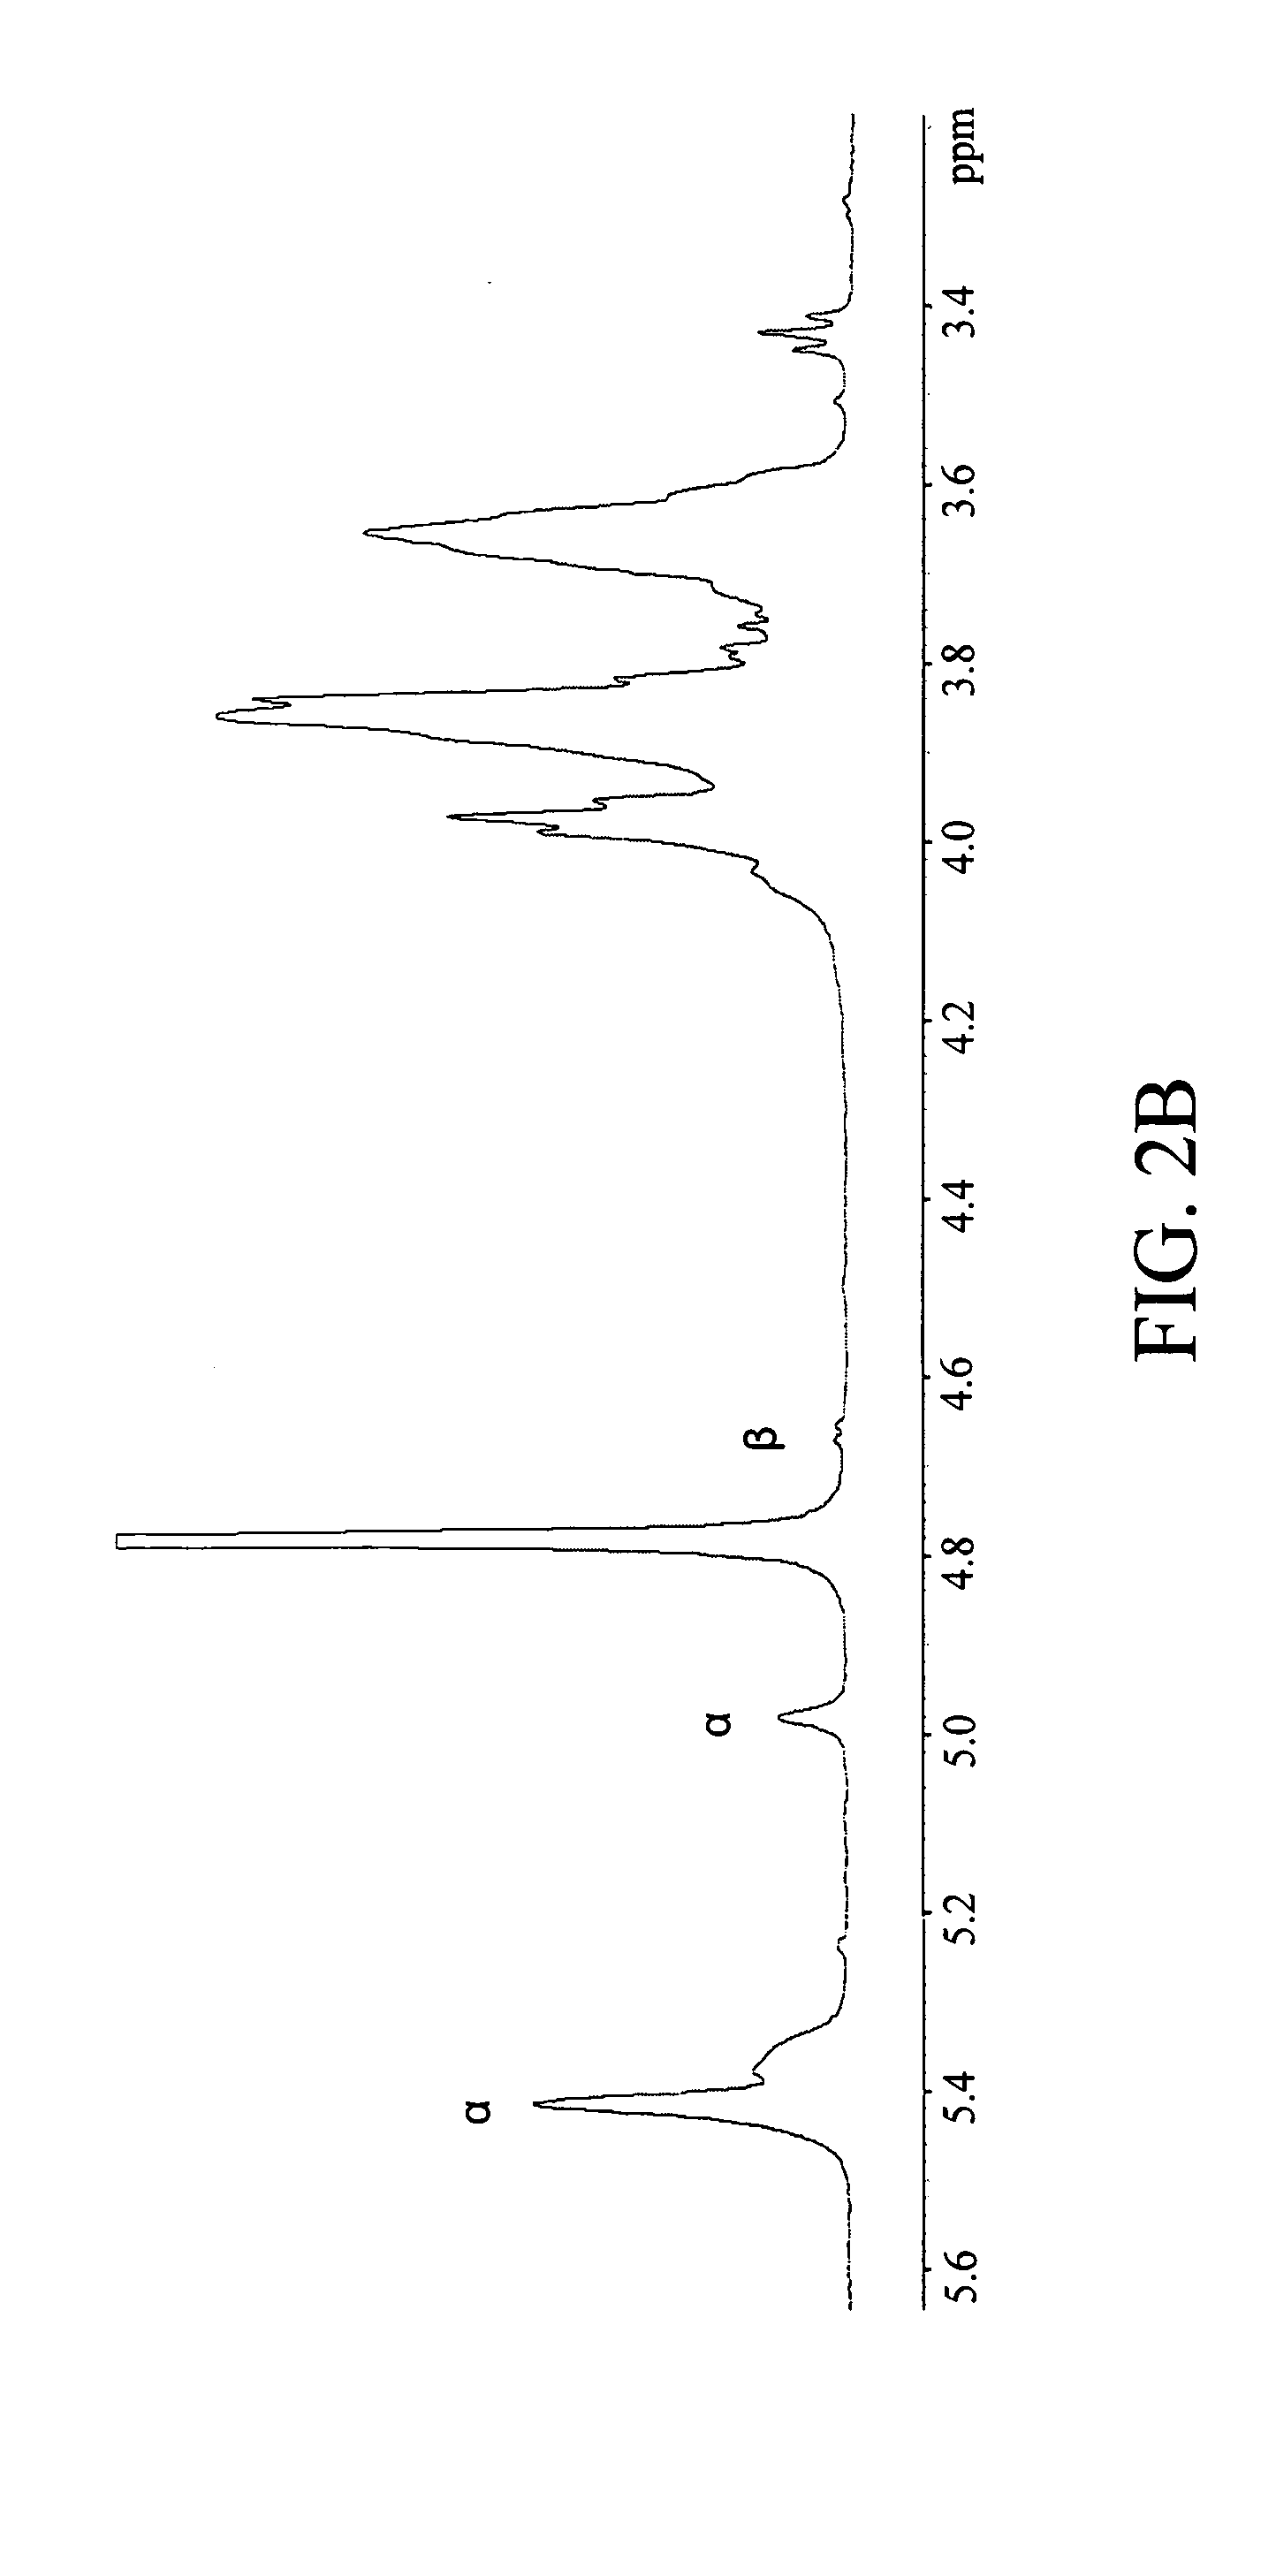 Materials and methods for immune system stimulation